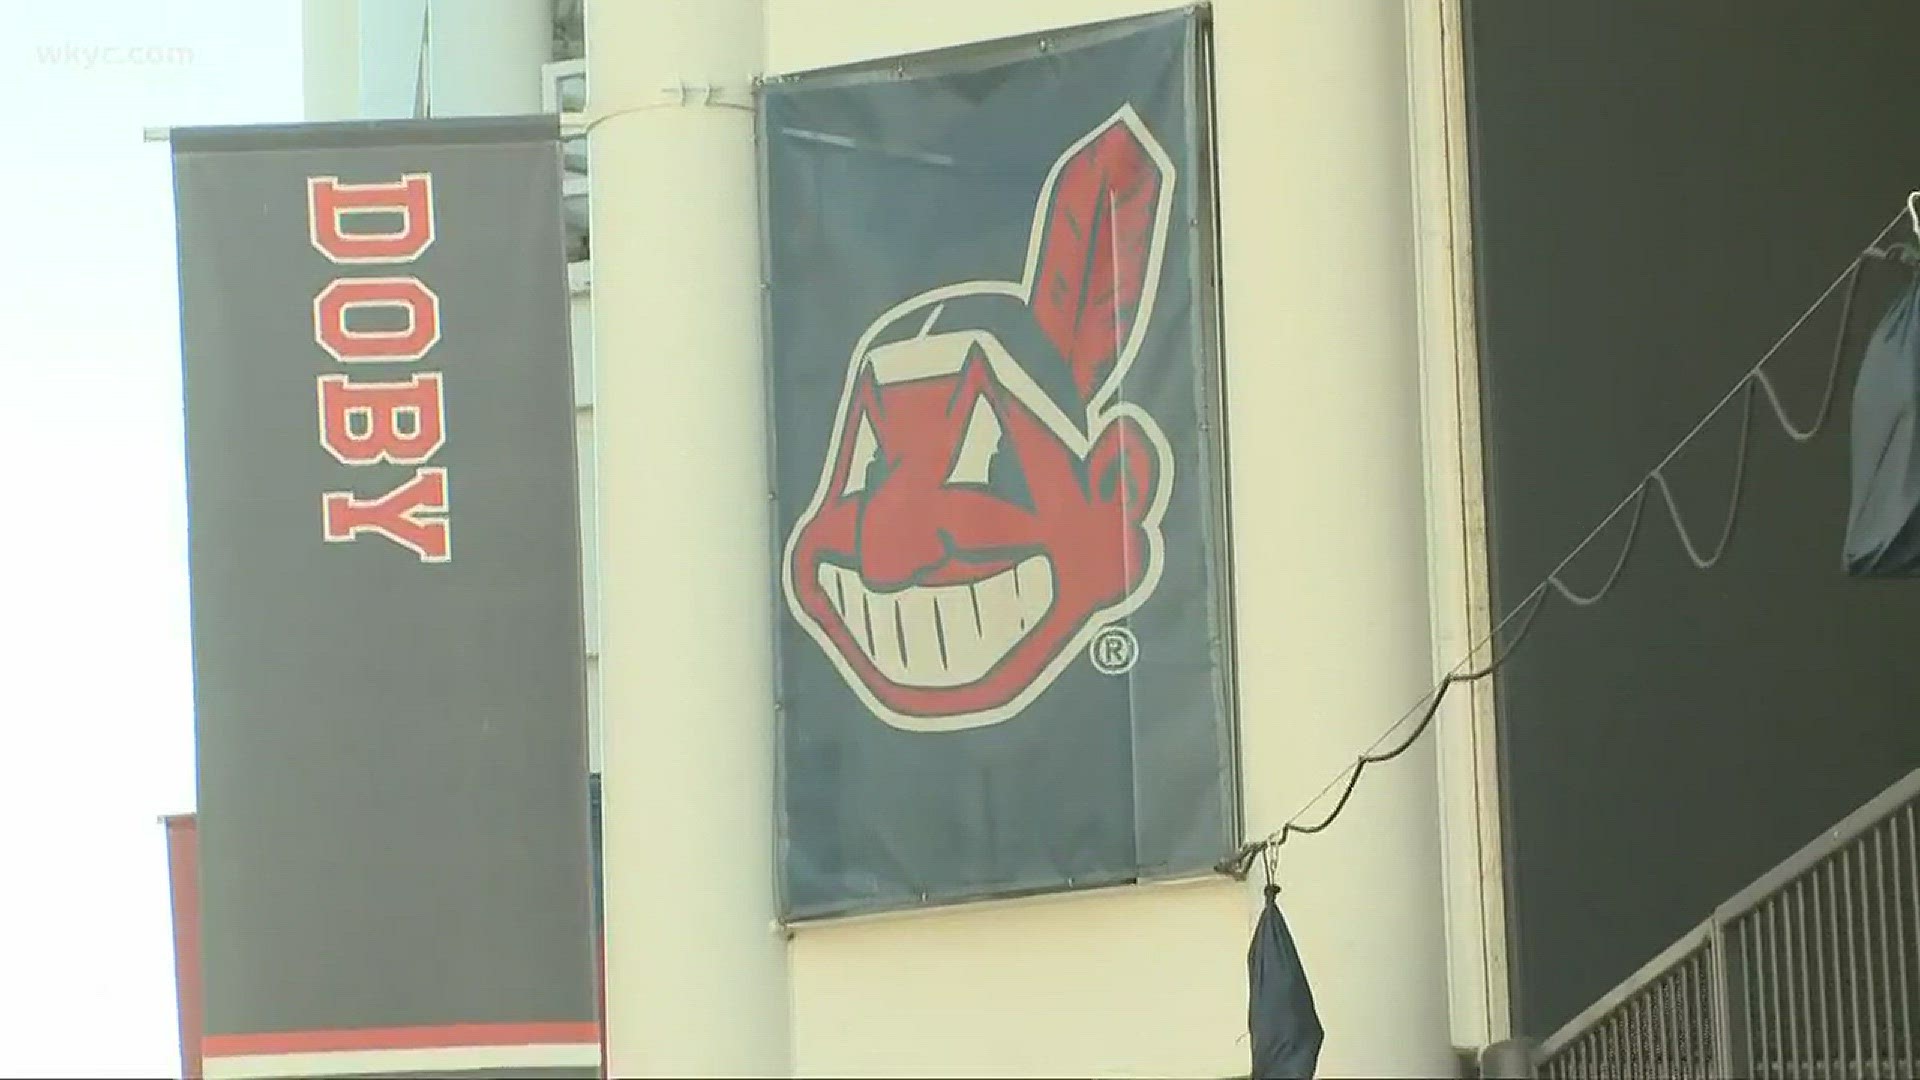 Fans react to news that Cleveland Indians will no longer wear